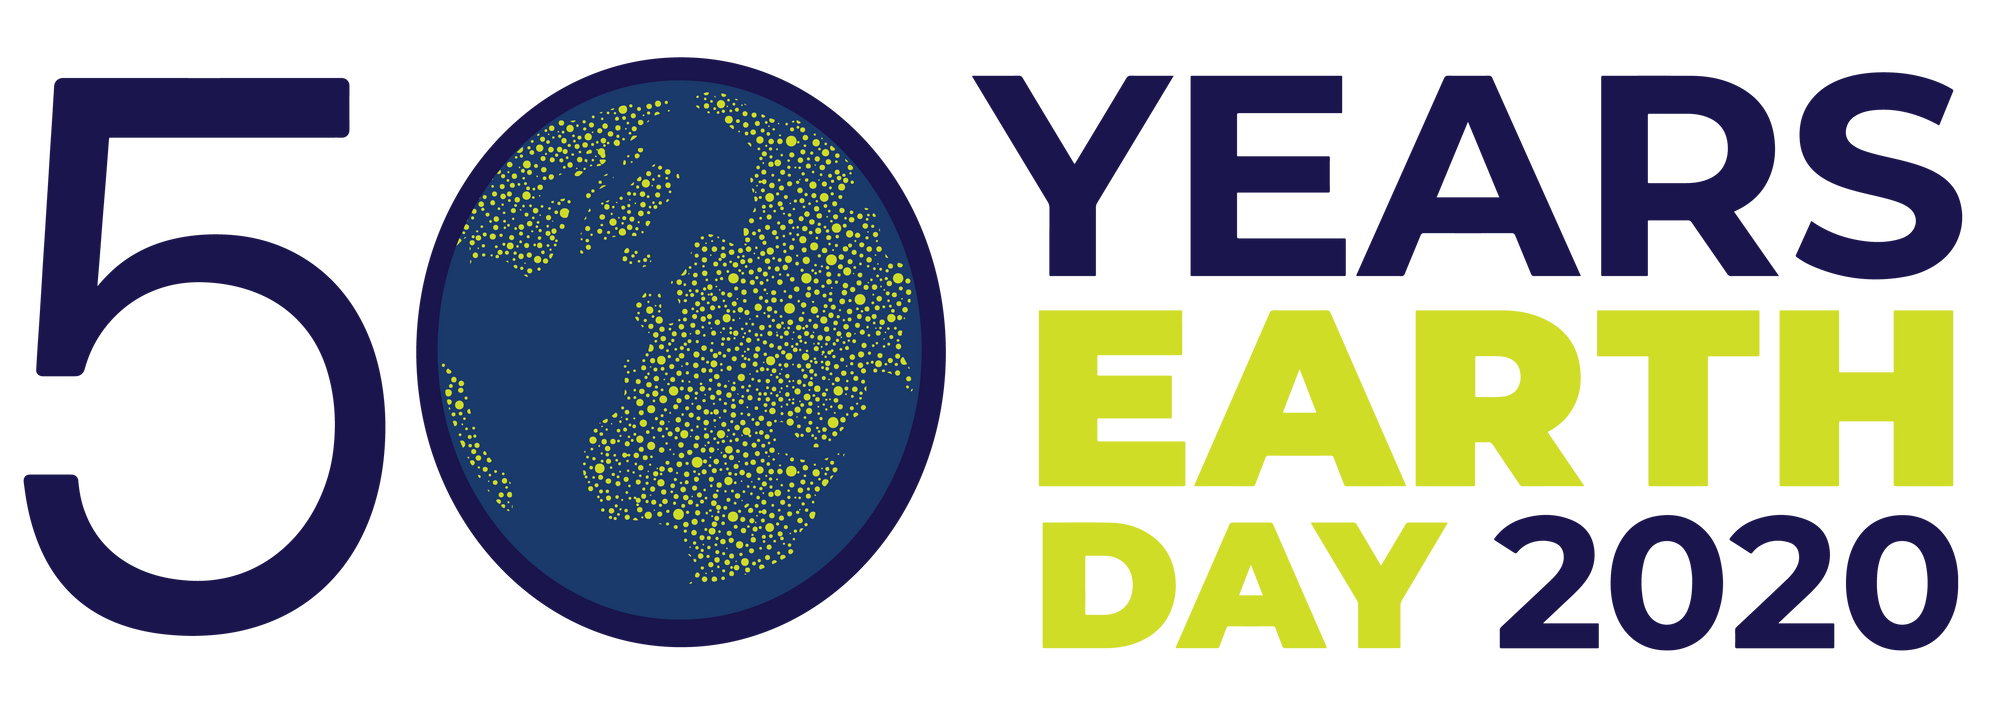 Earth Day: Celebrating 50 years